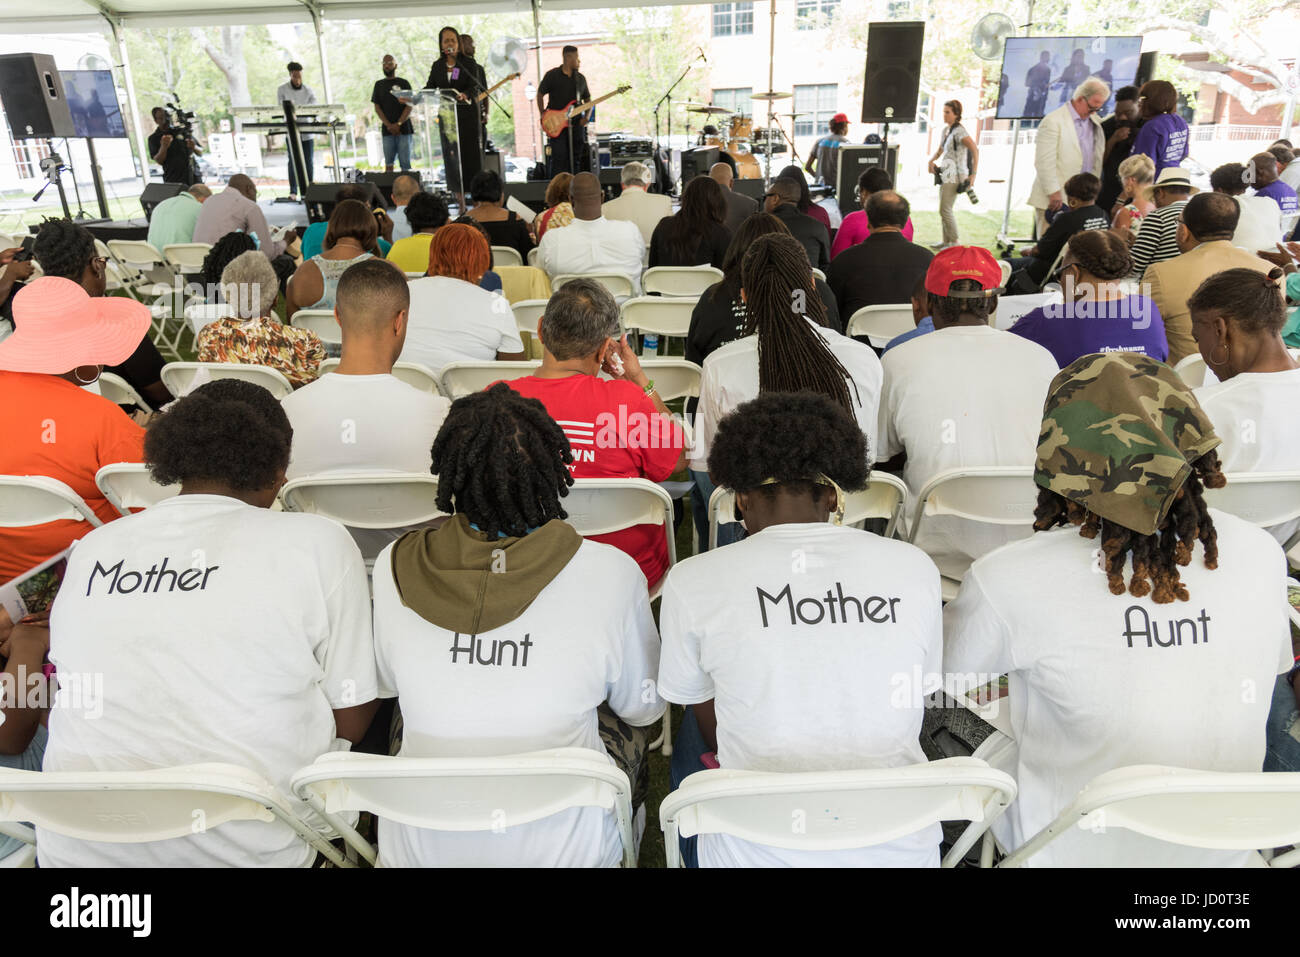 Charleston, South Carolina, USA. 17th June, 2017. Family members of Rev. Depayne Middleton-Doctor, killed in the Mother Emanuel African Methodist Episcopal Church shooting wear shirts with their relationship to the slain pastor during a memorial service marking the 2nd anniversary of the mass shooting June 17, 2017 in Charleston, South Carolina. Nine members of the historic African-American church were gunned down by a white supremacist during bible study on June 17, 2015. Credit: Planetpix/Alamy Live News Stock Photo